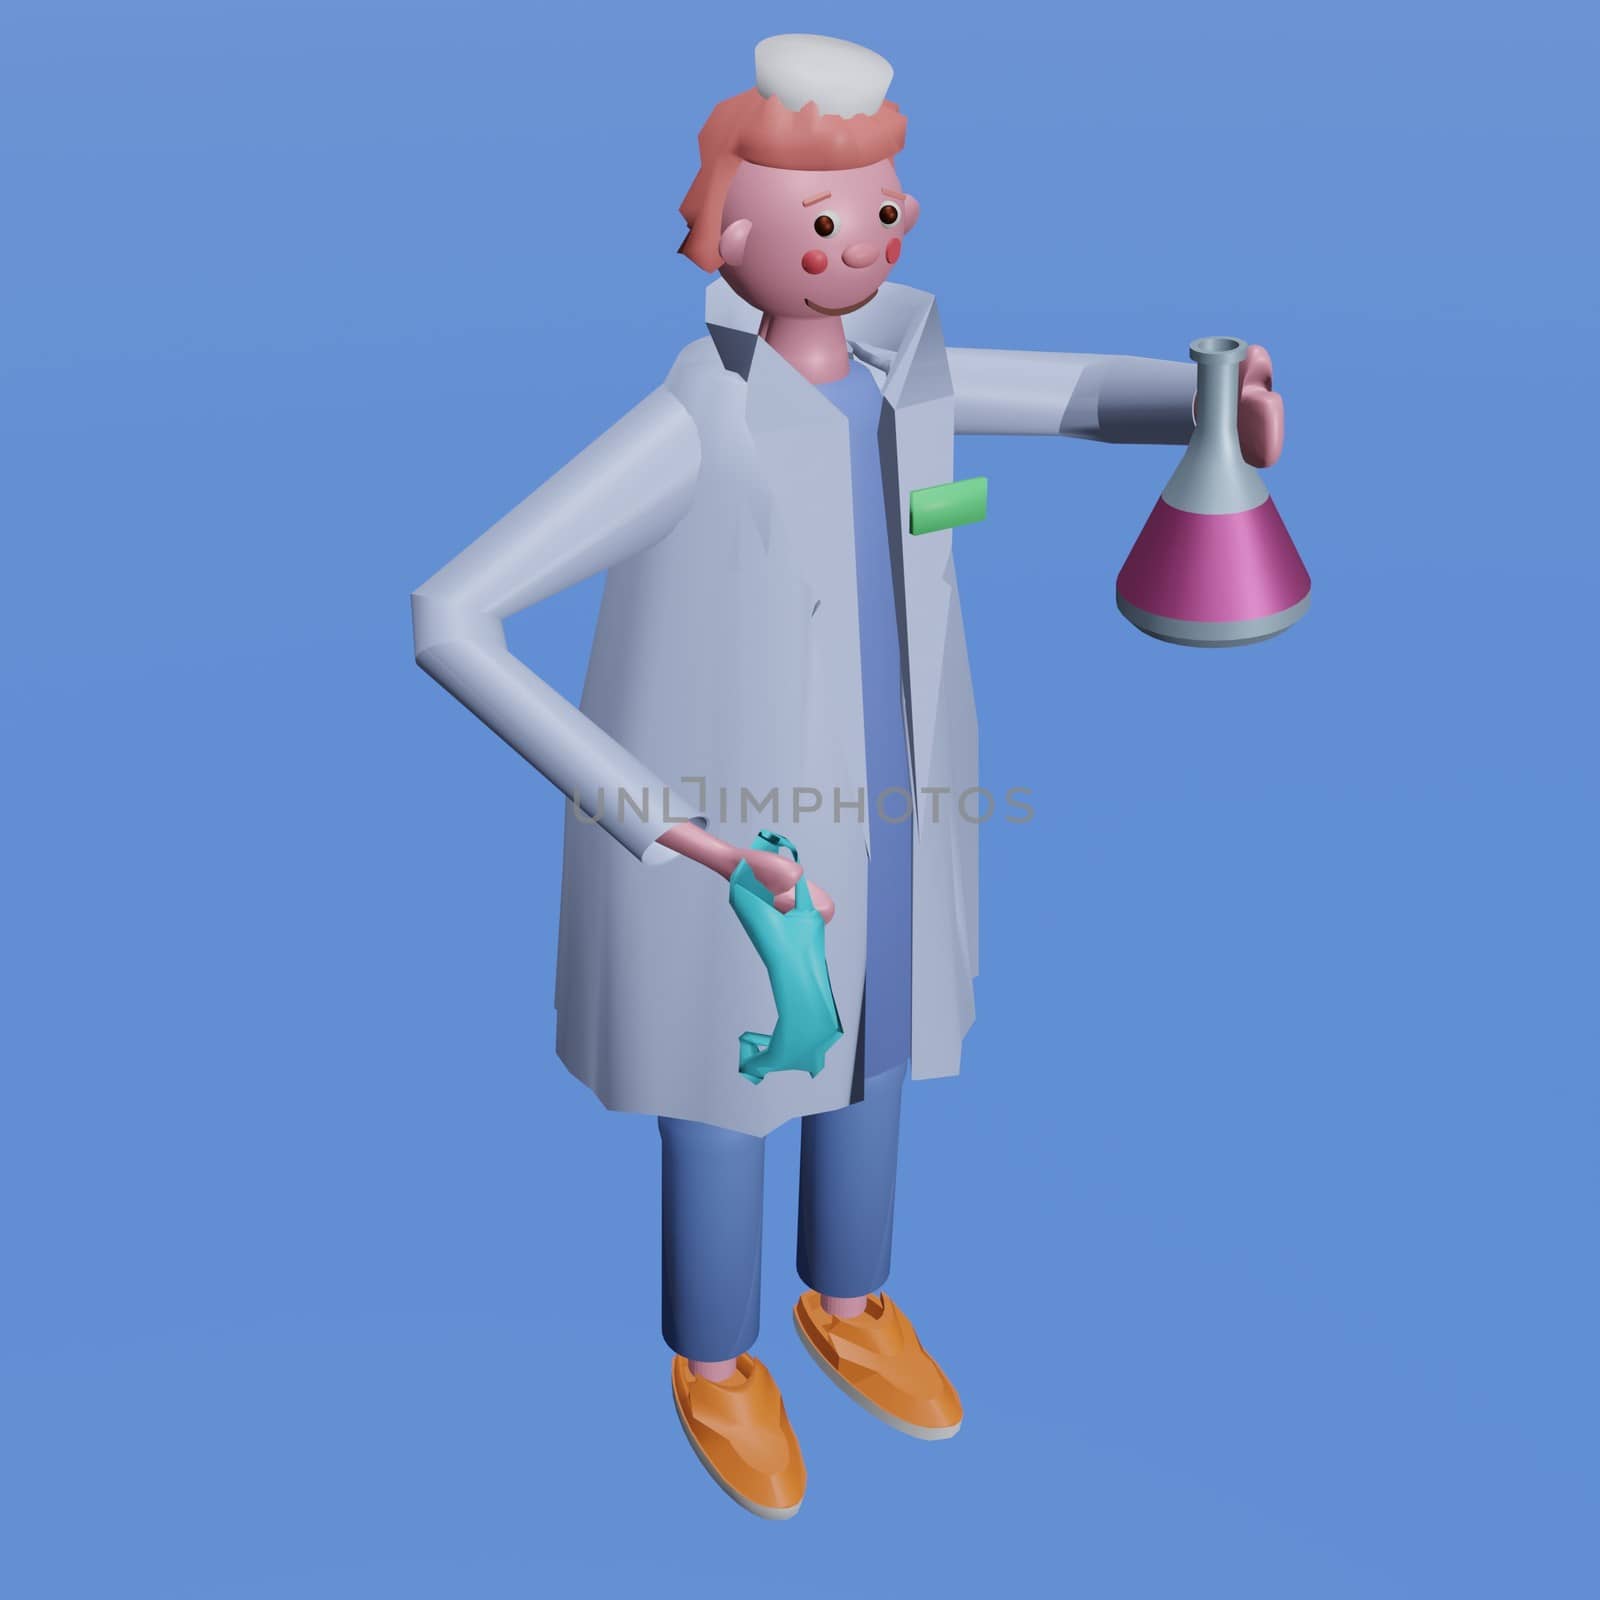 Medical scientist with a medical mask holding a glass test tube with liquid medicine or vaccine for the virus. 3D render illustration, volumetric image